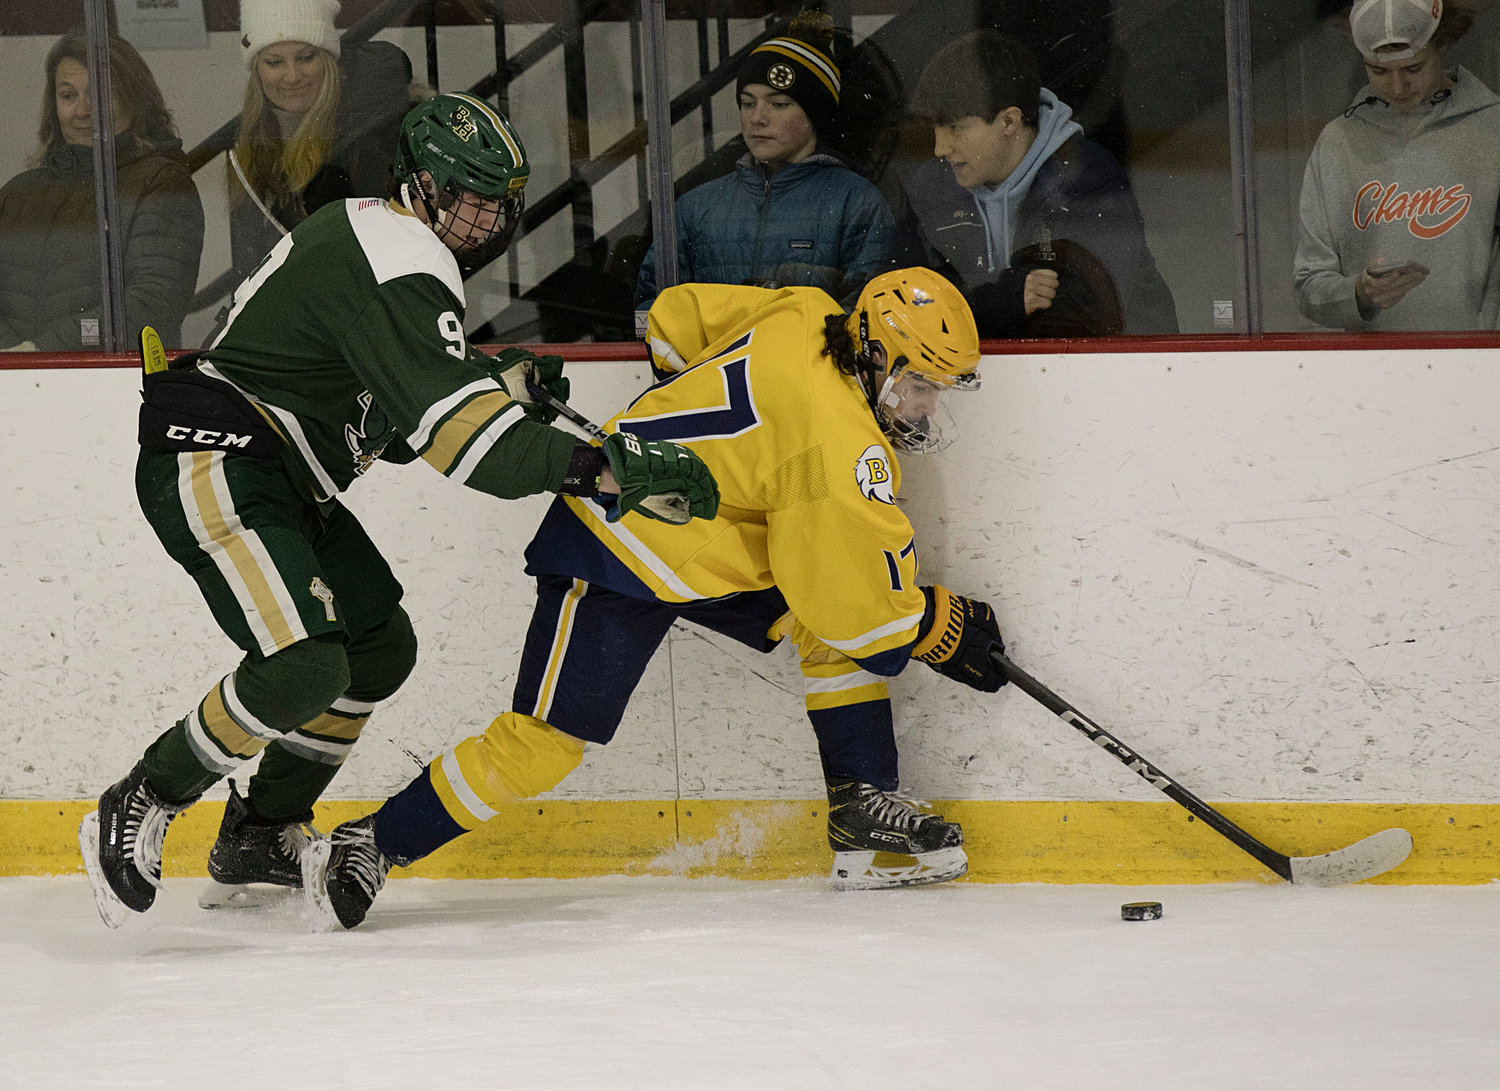 A Hendricken opponent pressures Drake Almeida from behind during game two of the Division 1 quarterfinals, Saturday.